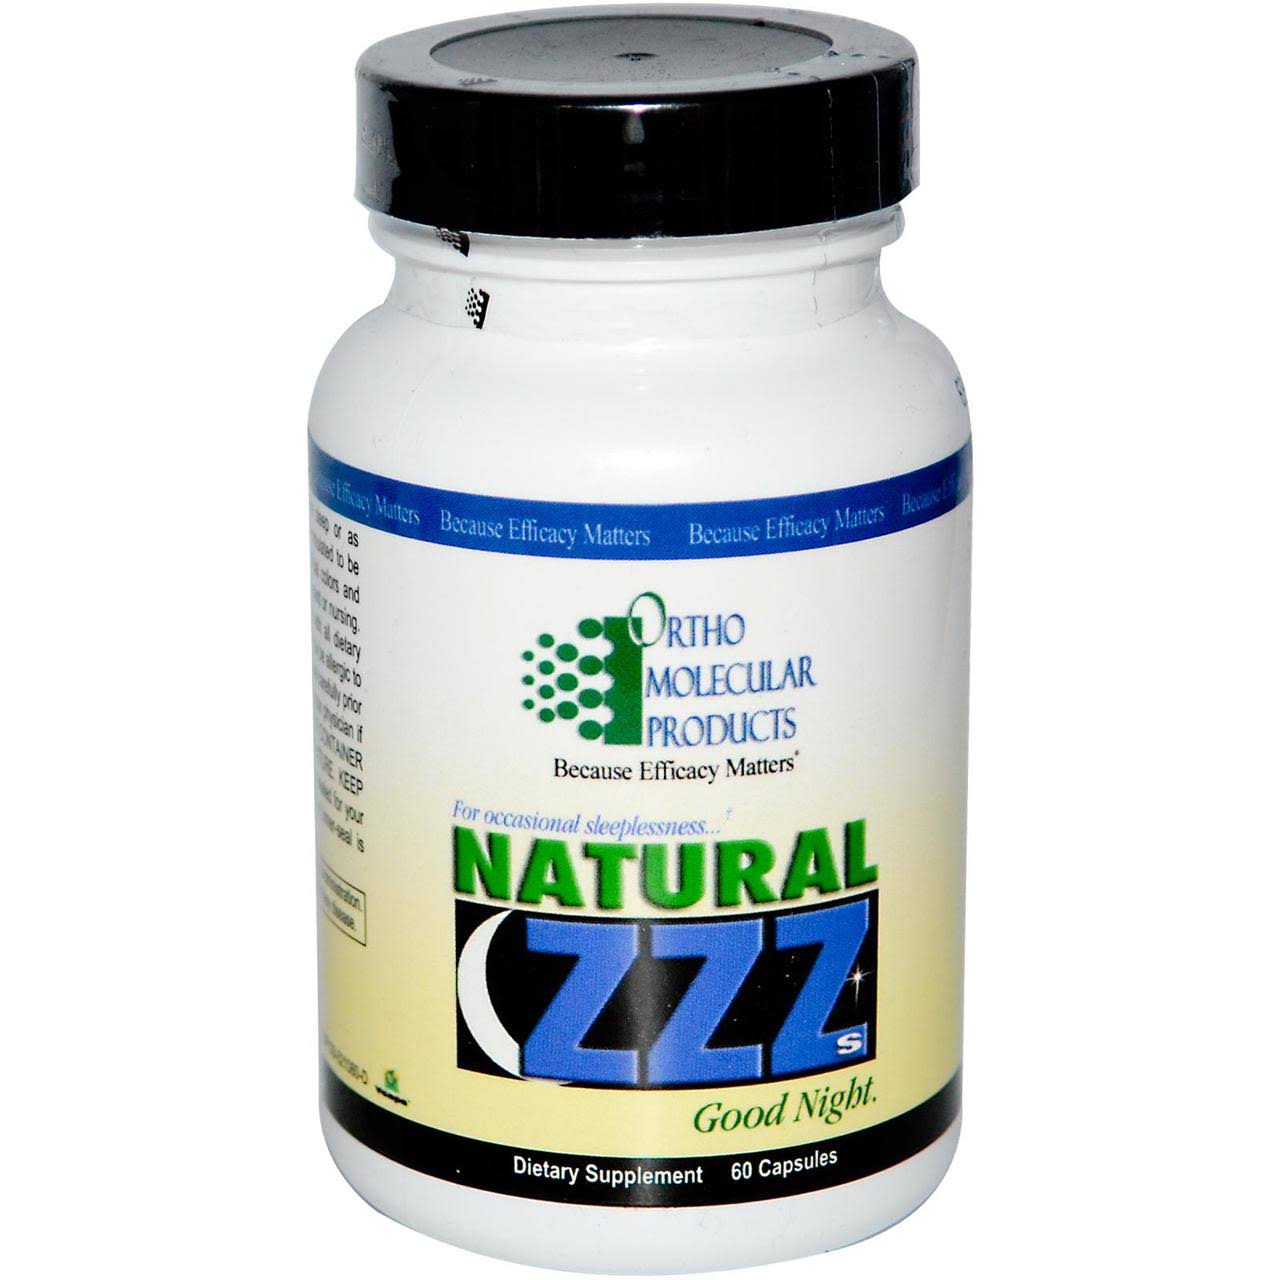 Ortho Molecular Products Natural ZZZ Dietary Supplement - 60ct